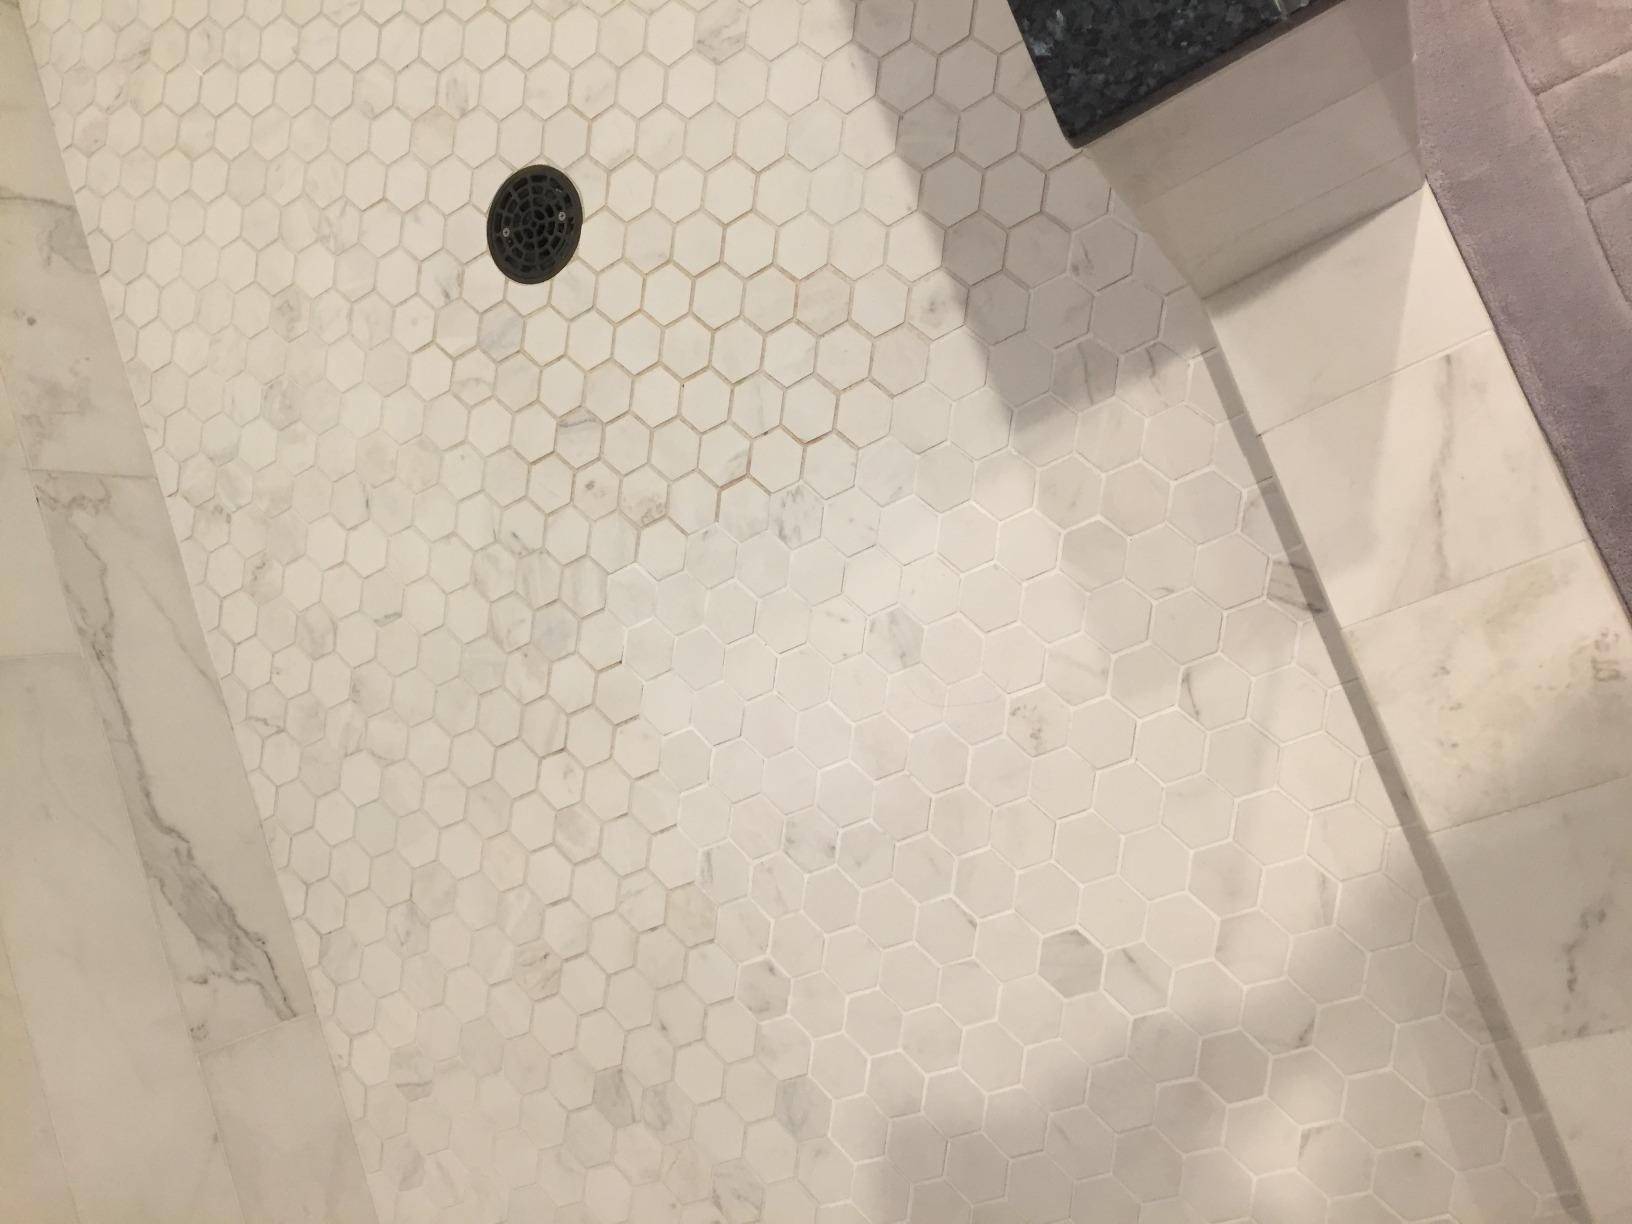 a reviewer photo of a section of the grout cleaned with the pen